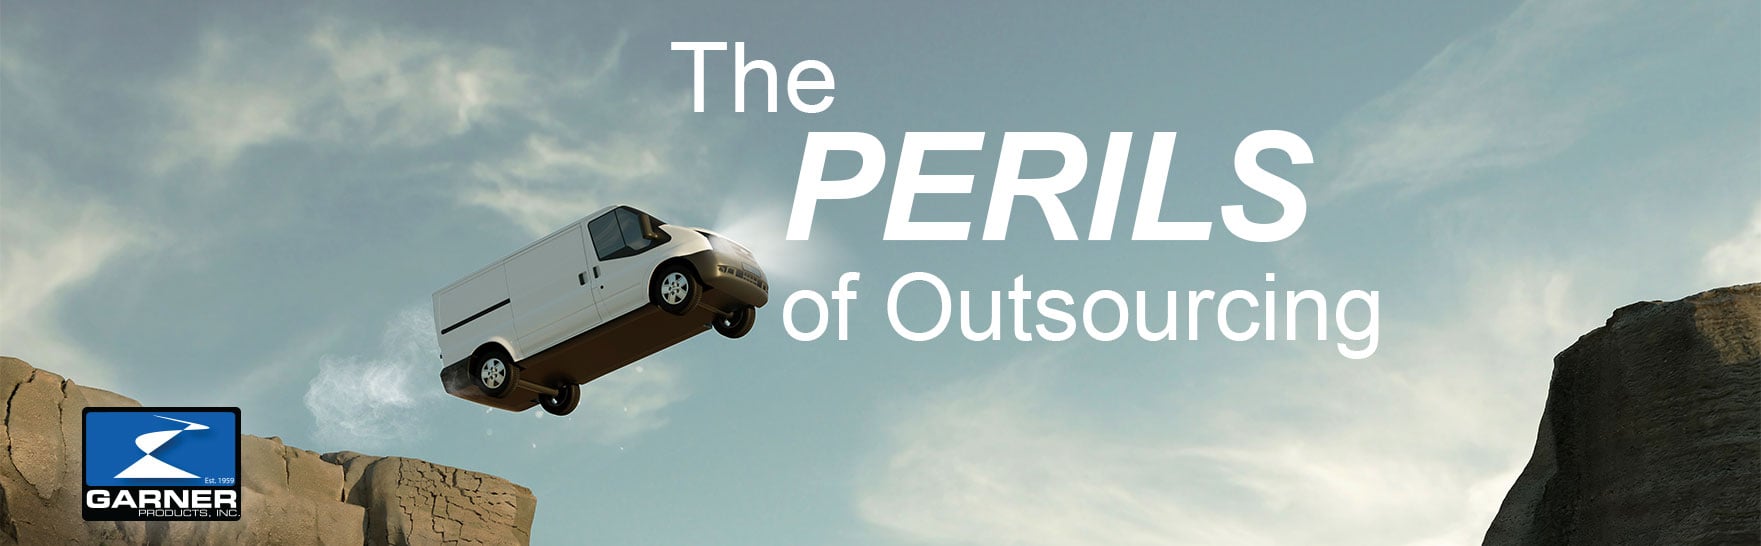 perils-of-outsourcing-banner-1